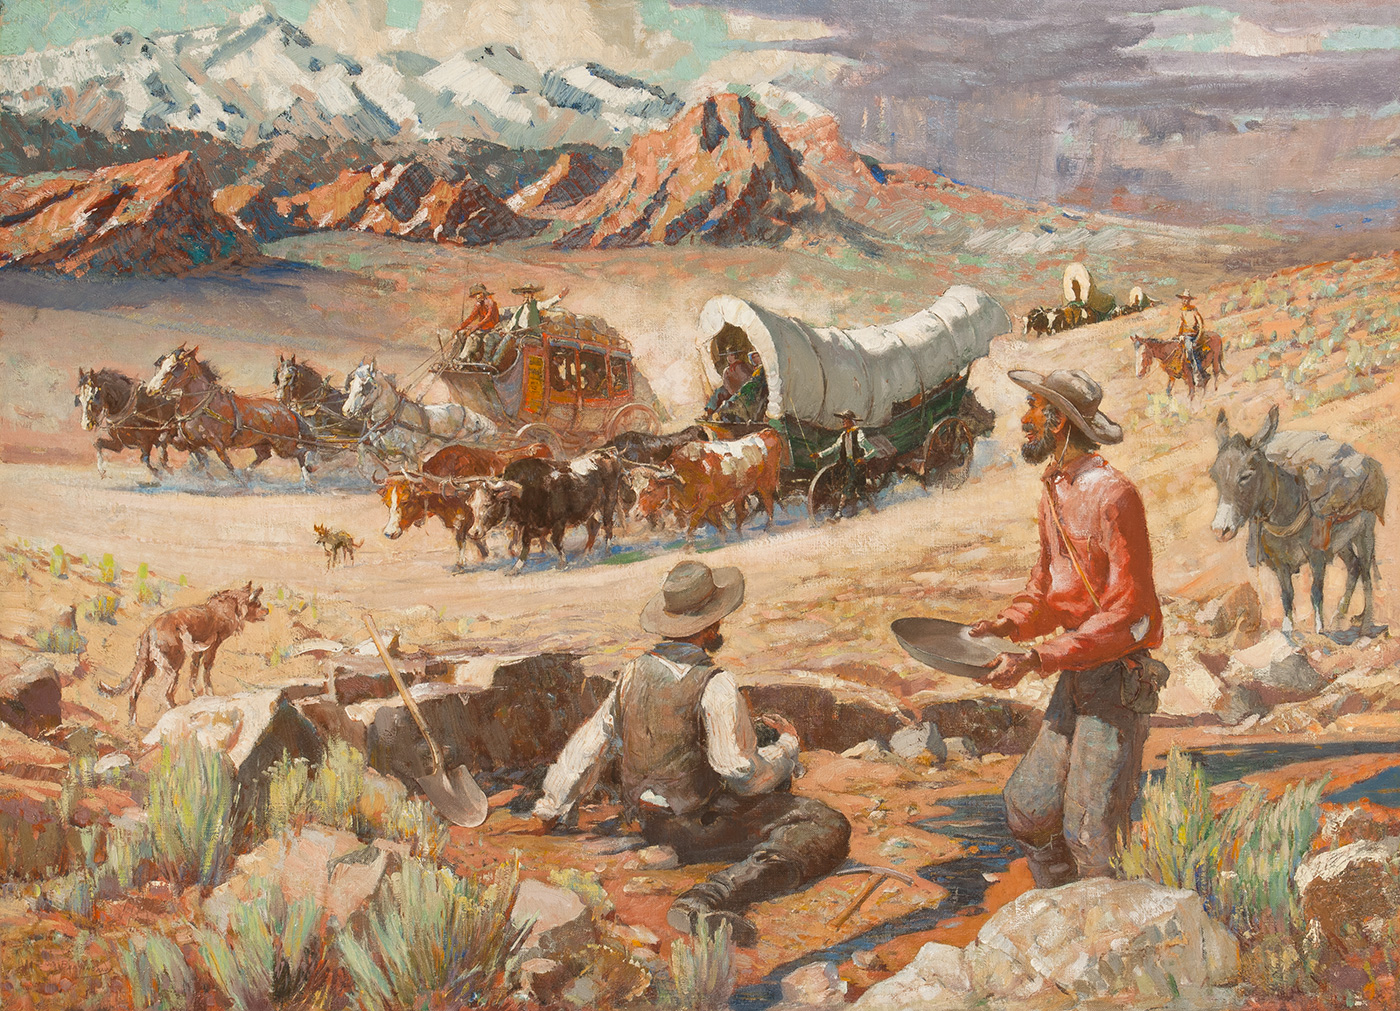 Two men panhandling for gold watch a stagecoach and covered wagon pass by with mountains in the distance.